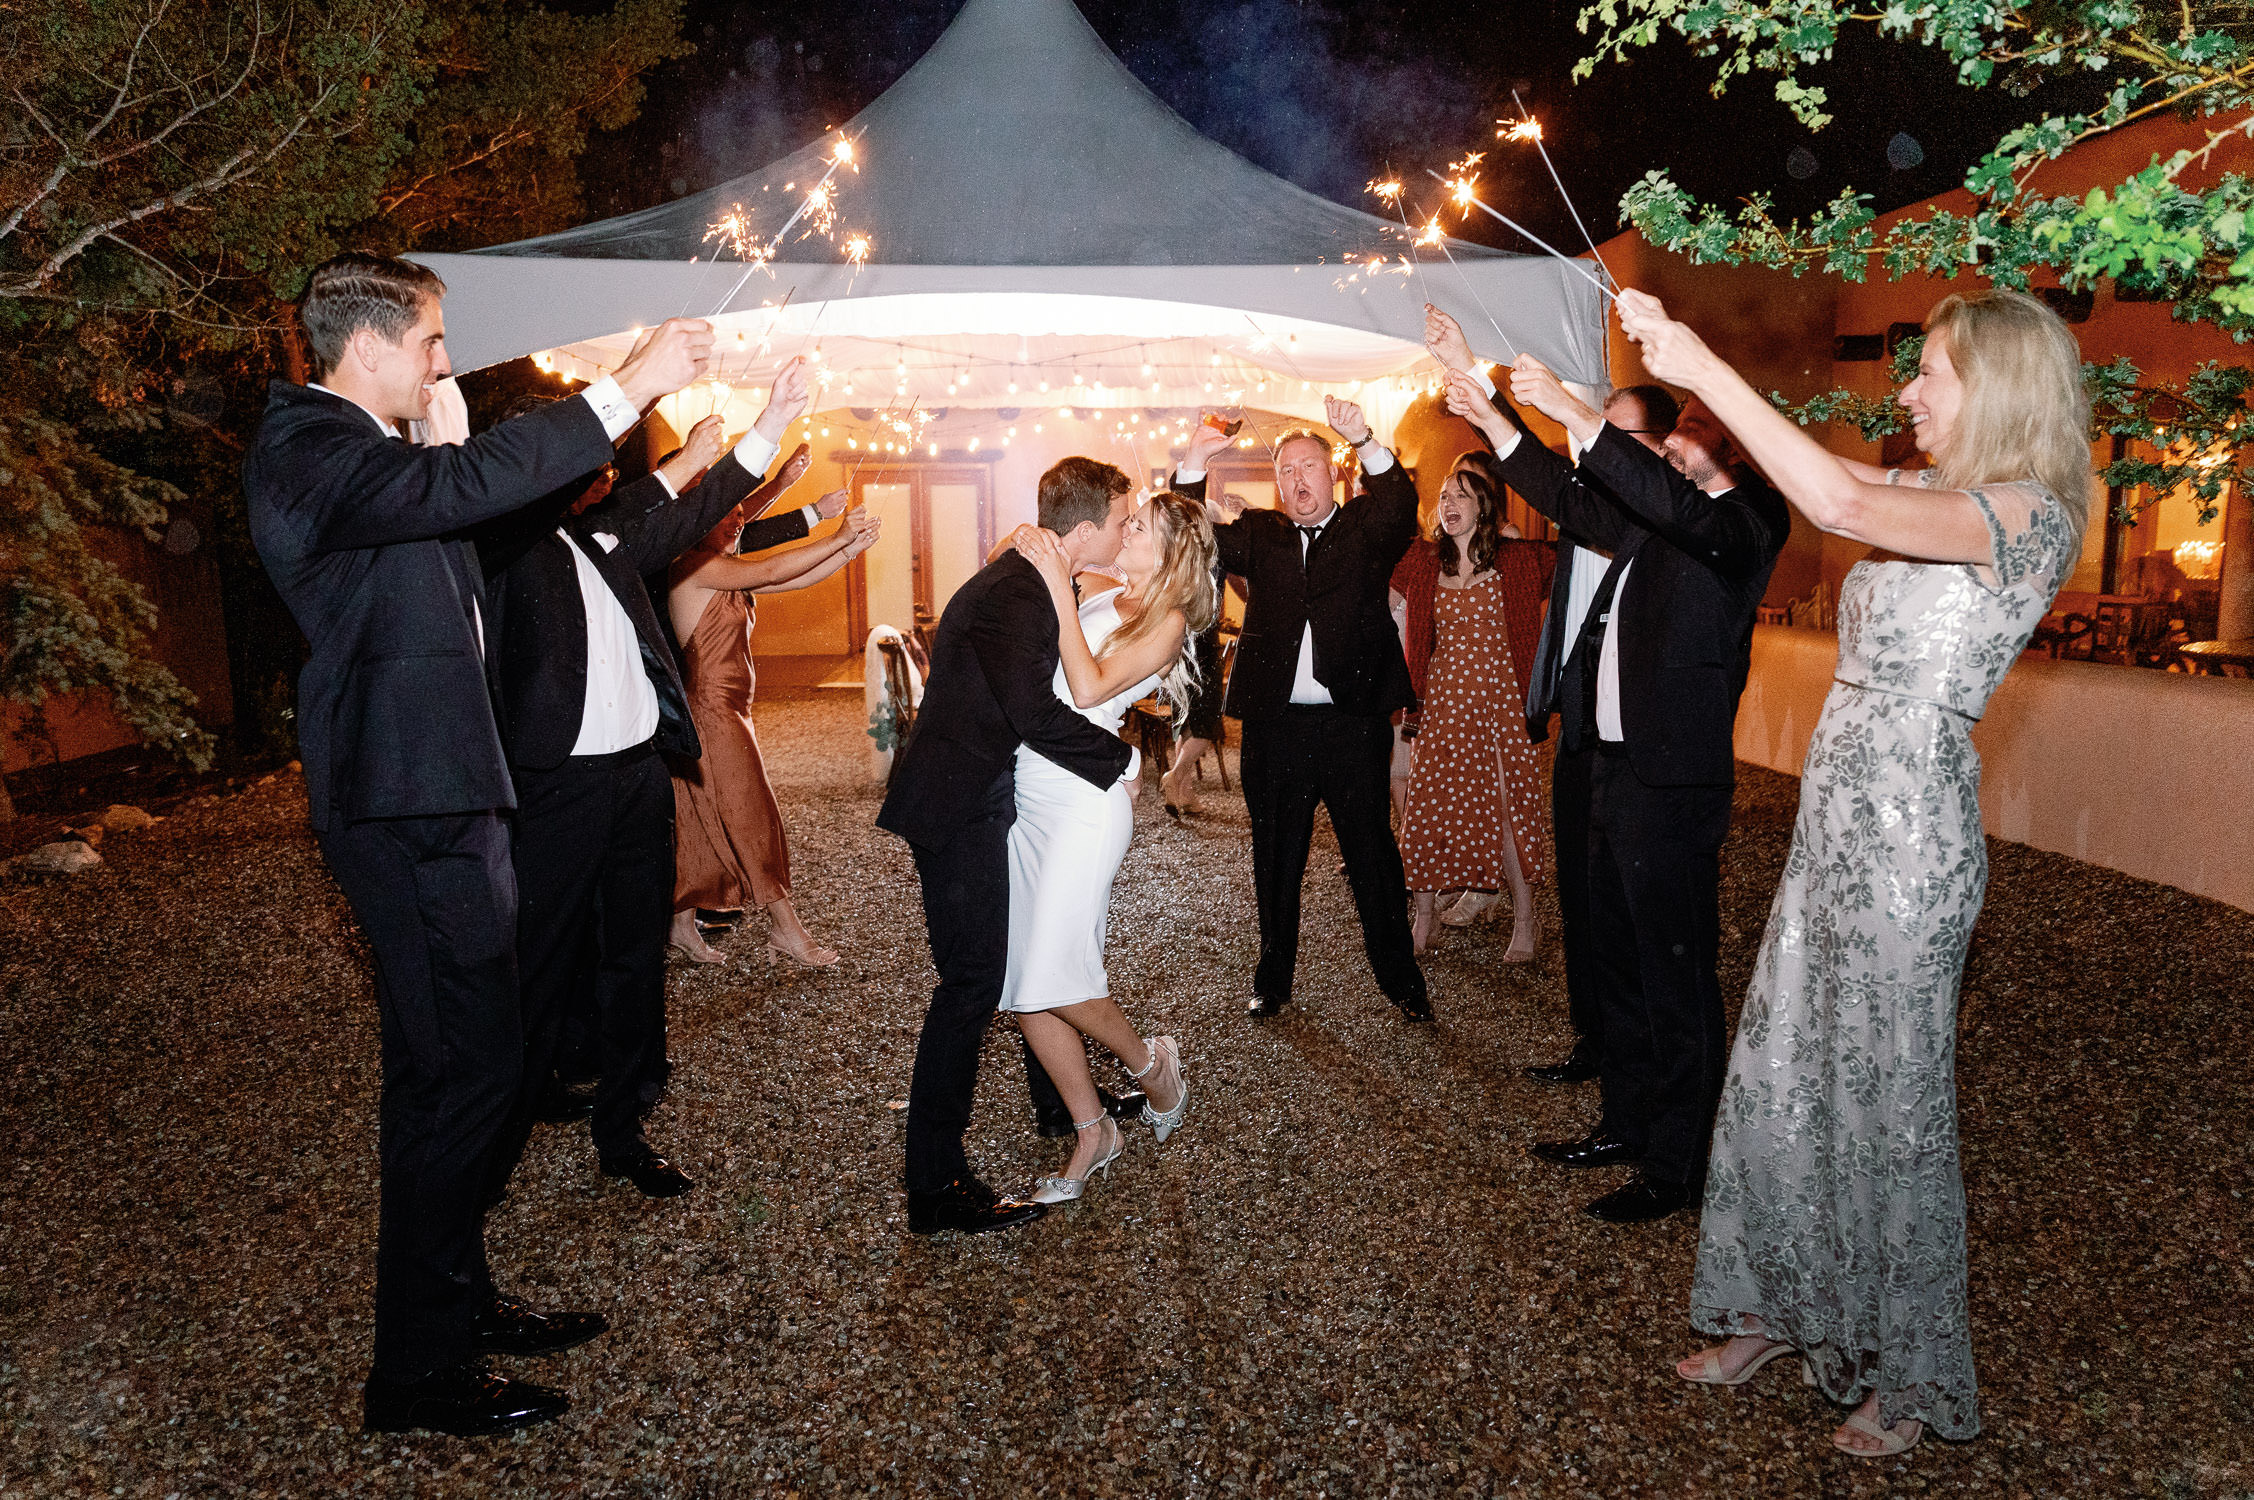 Chic Bride and Groom leave wedding while guests hold sparklers.